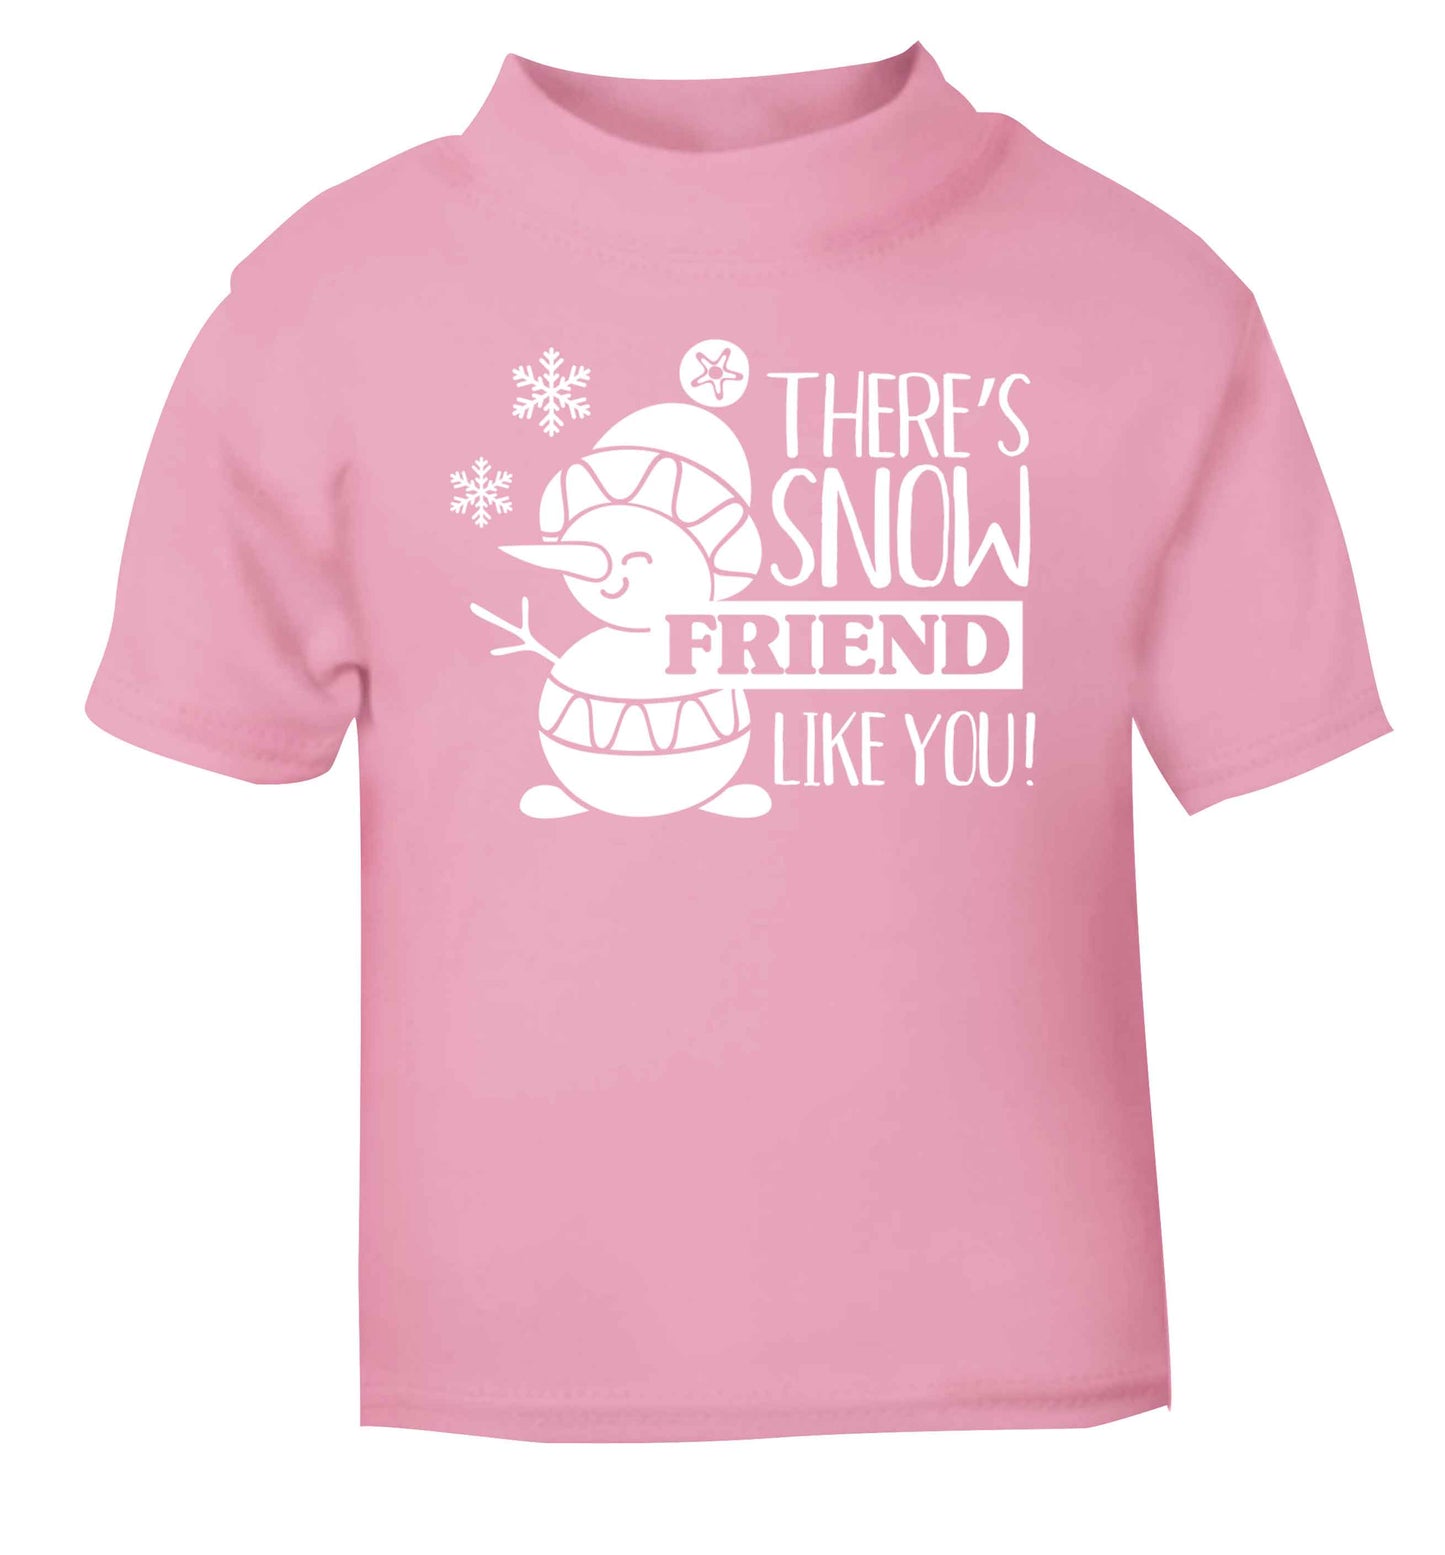 There's snow friend like you light pink baby toddler Tshirt 2 Years